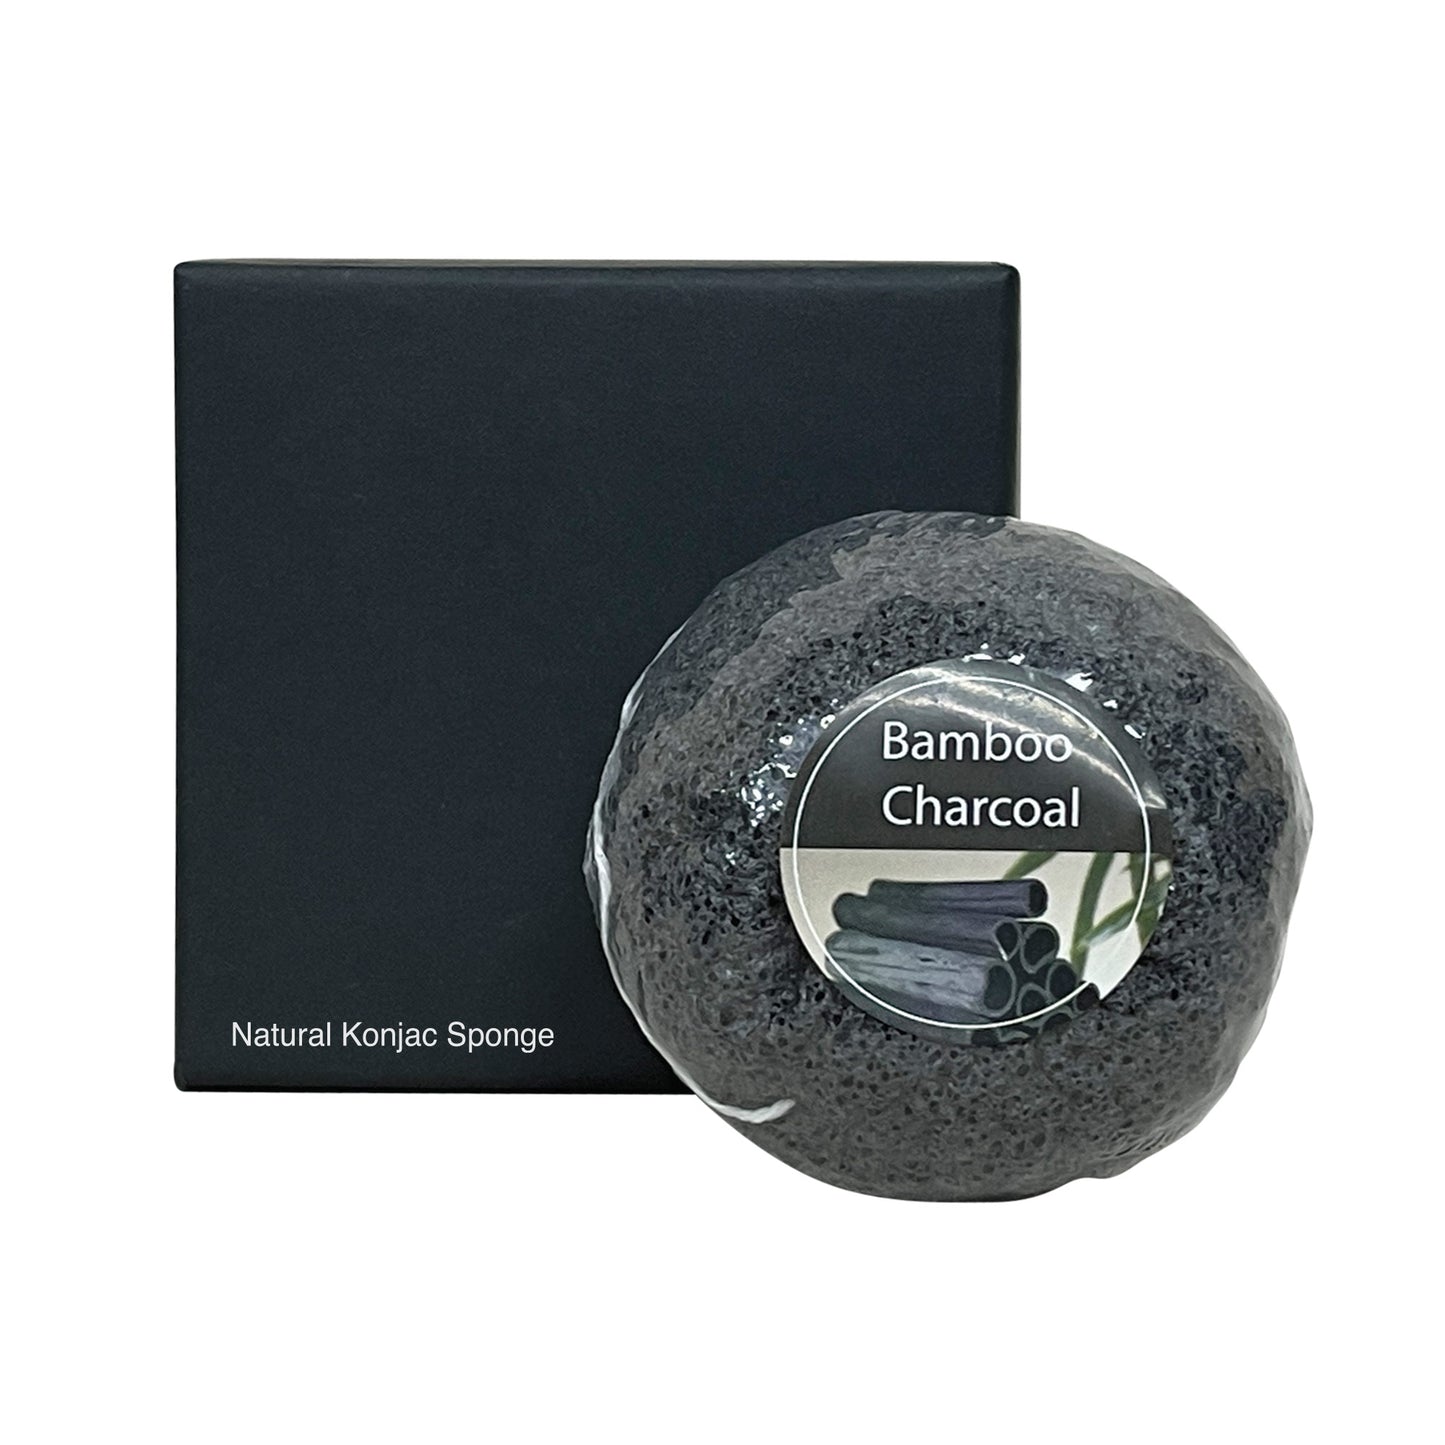 Cruisin Organics  natural, plant fiber Konjac Sponge for a better exfoliating face scrub. This rounded sponge fits perfectly in the palm of your hand for your daily facial routine. Use it with your favorite cleanser to remove all impurities! Made from konjac root fibers, this sponge is biodegradable and all natural. The Konjac Sponge is the perfect solution for cleaner, smoother skin!